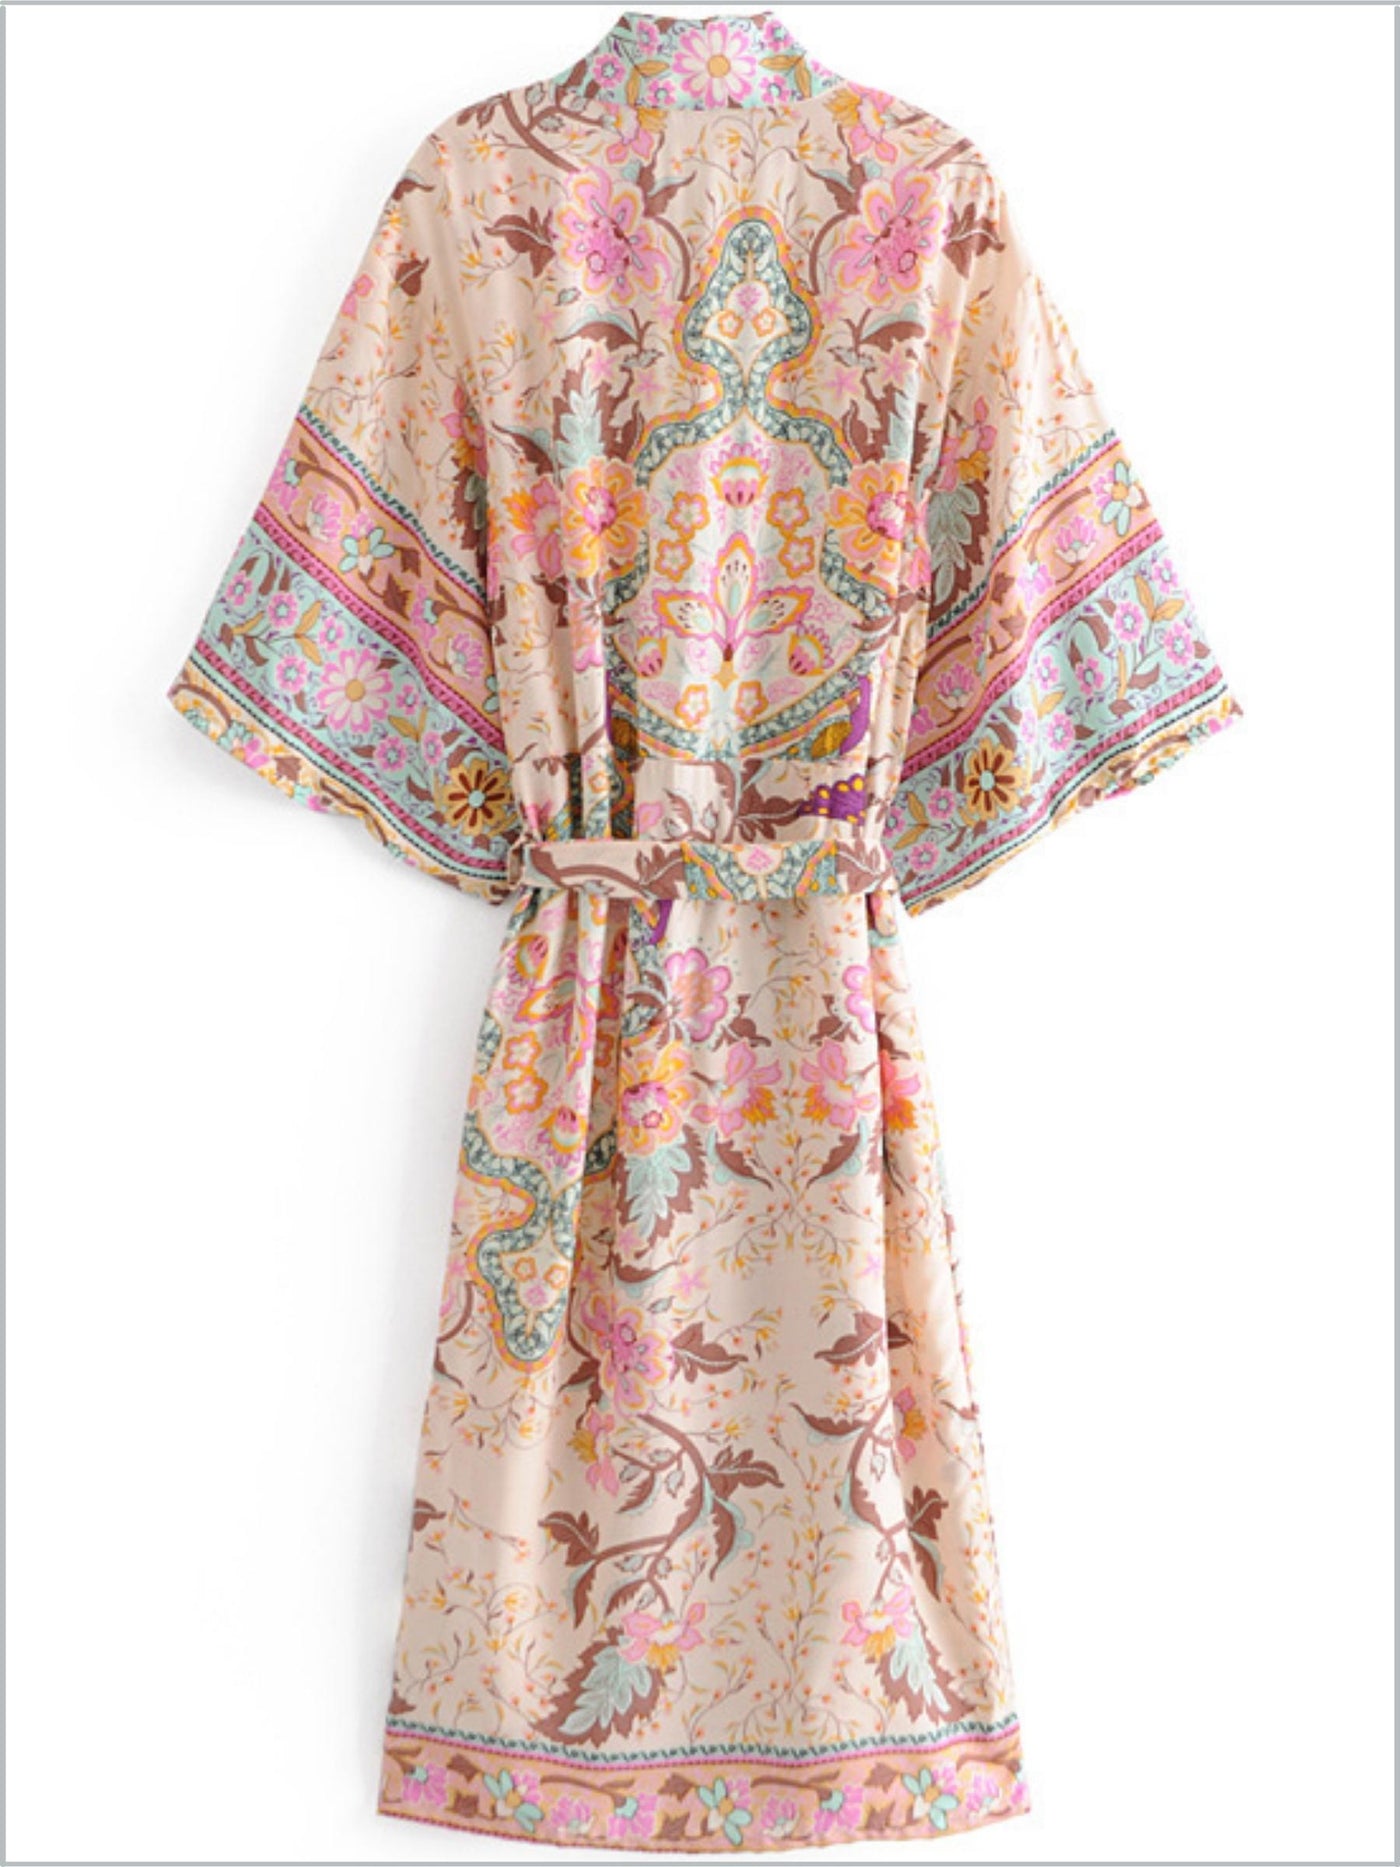 Women's Boho Floral Pattern Cover Up